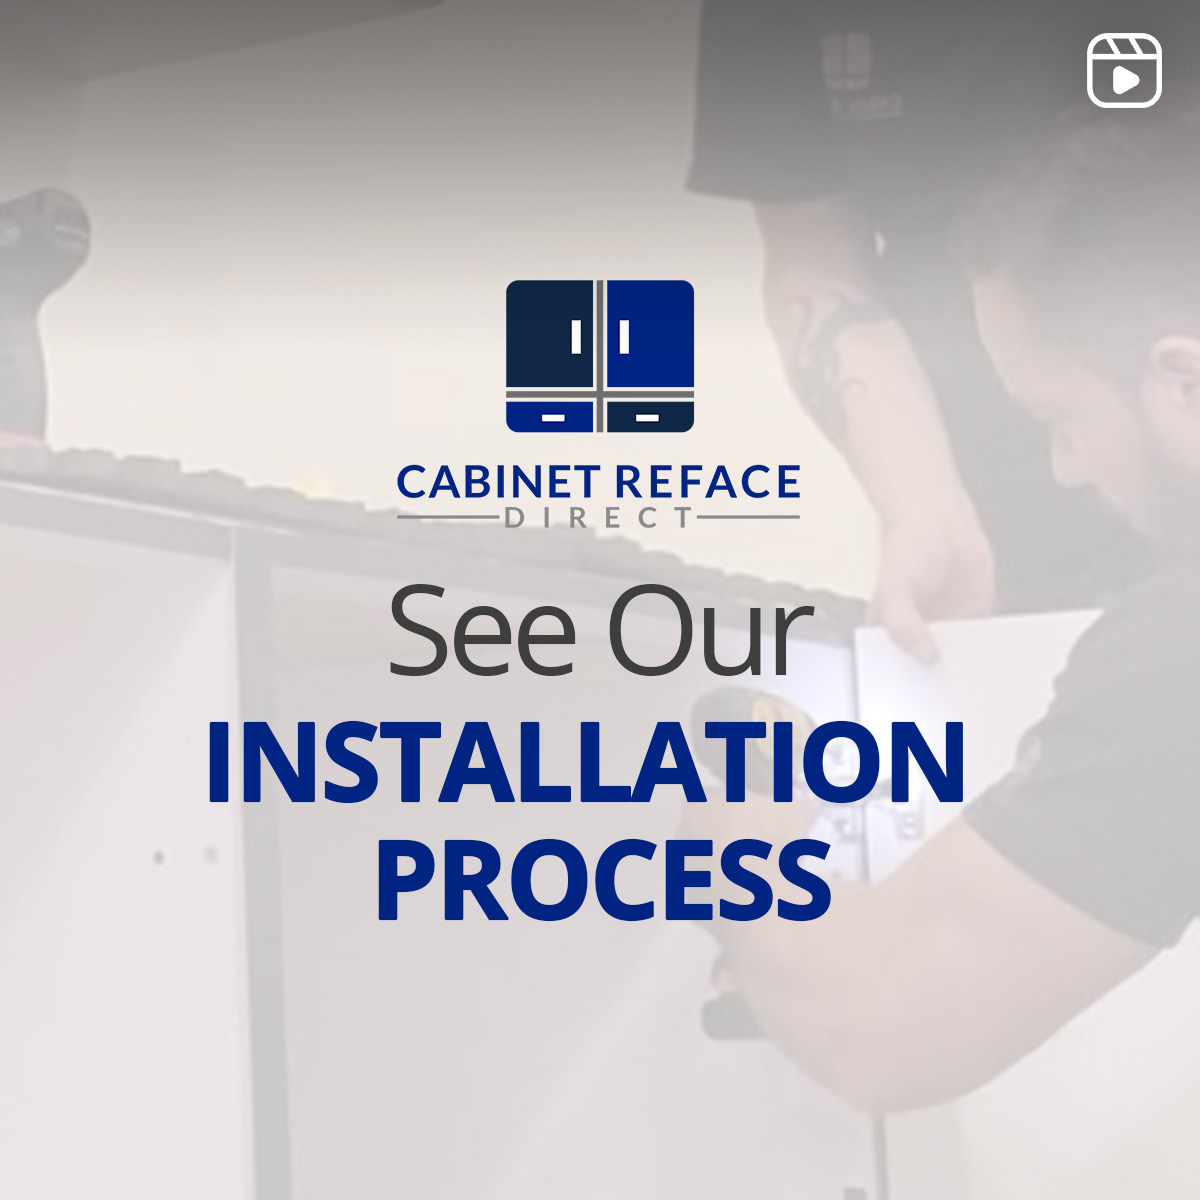 See our installation process